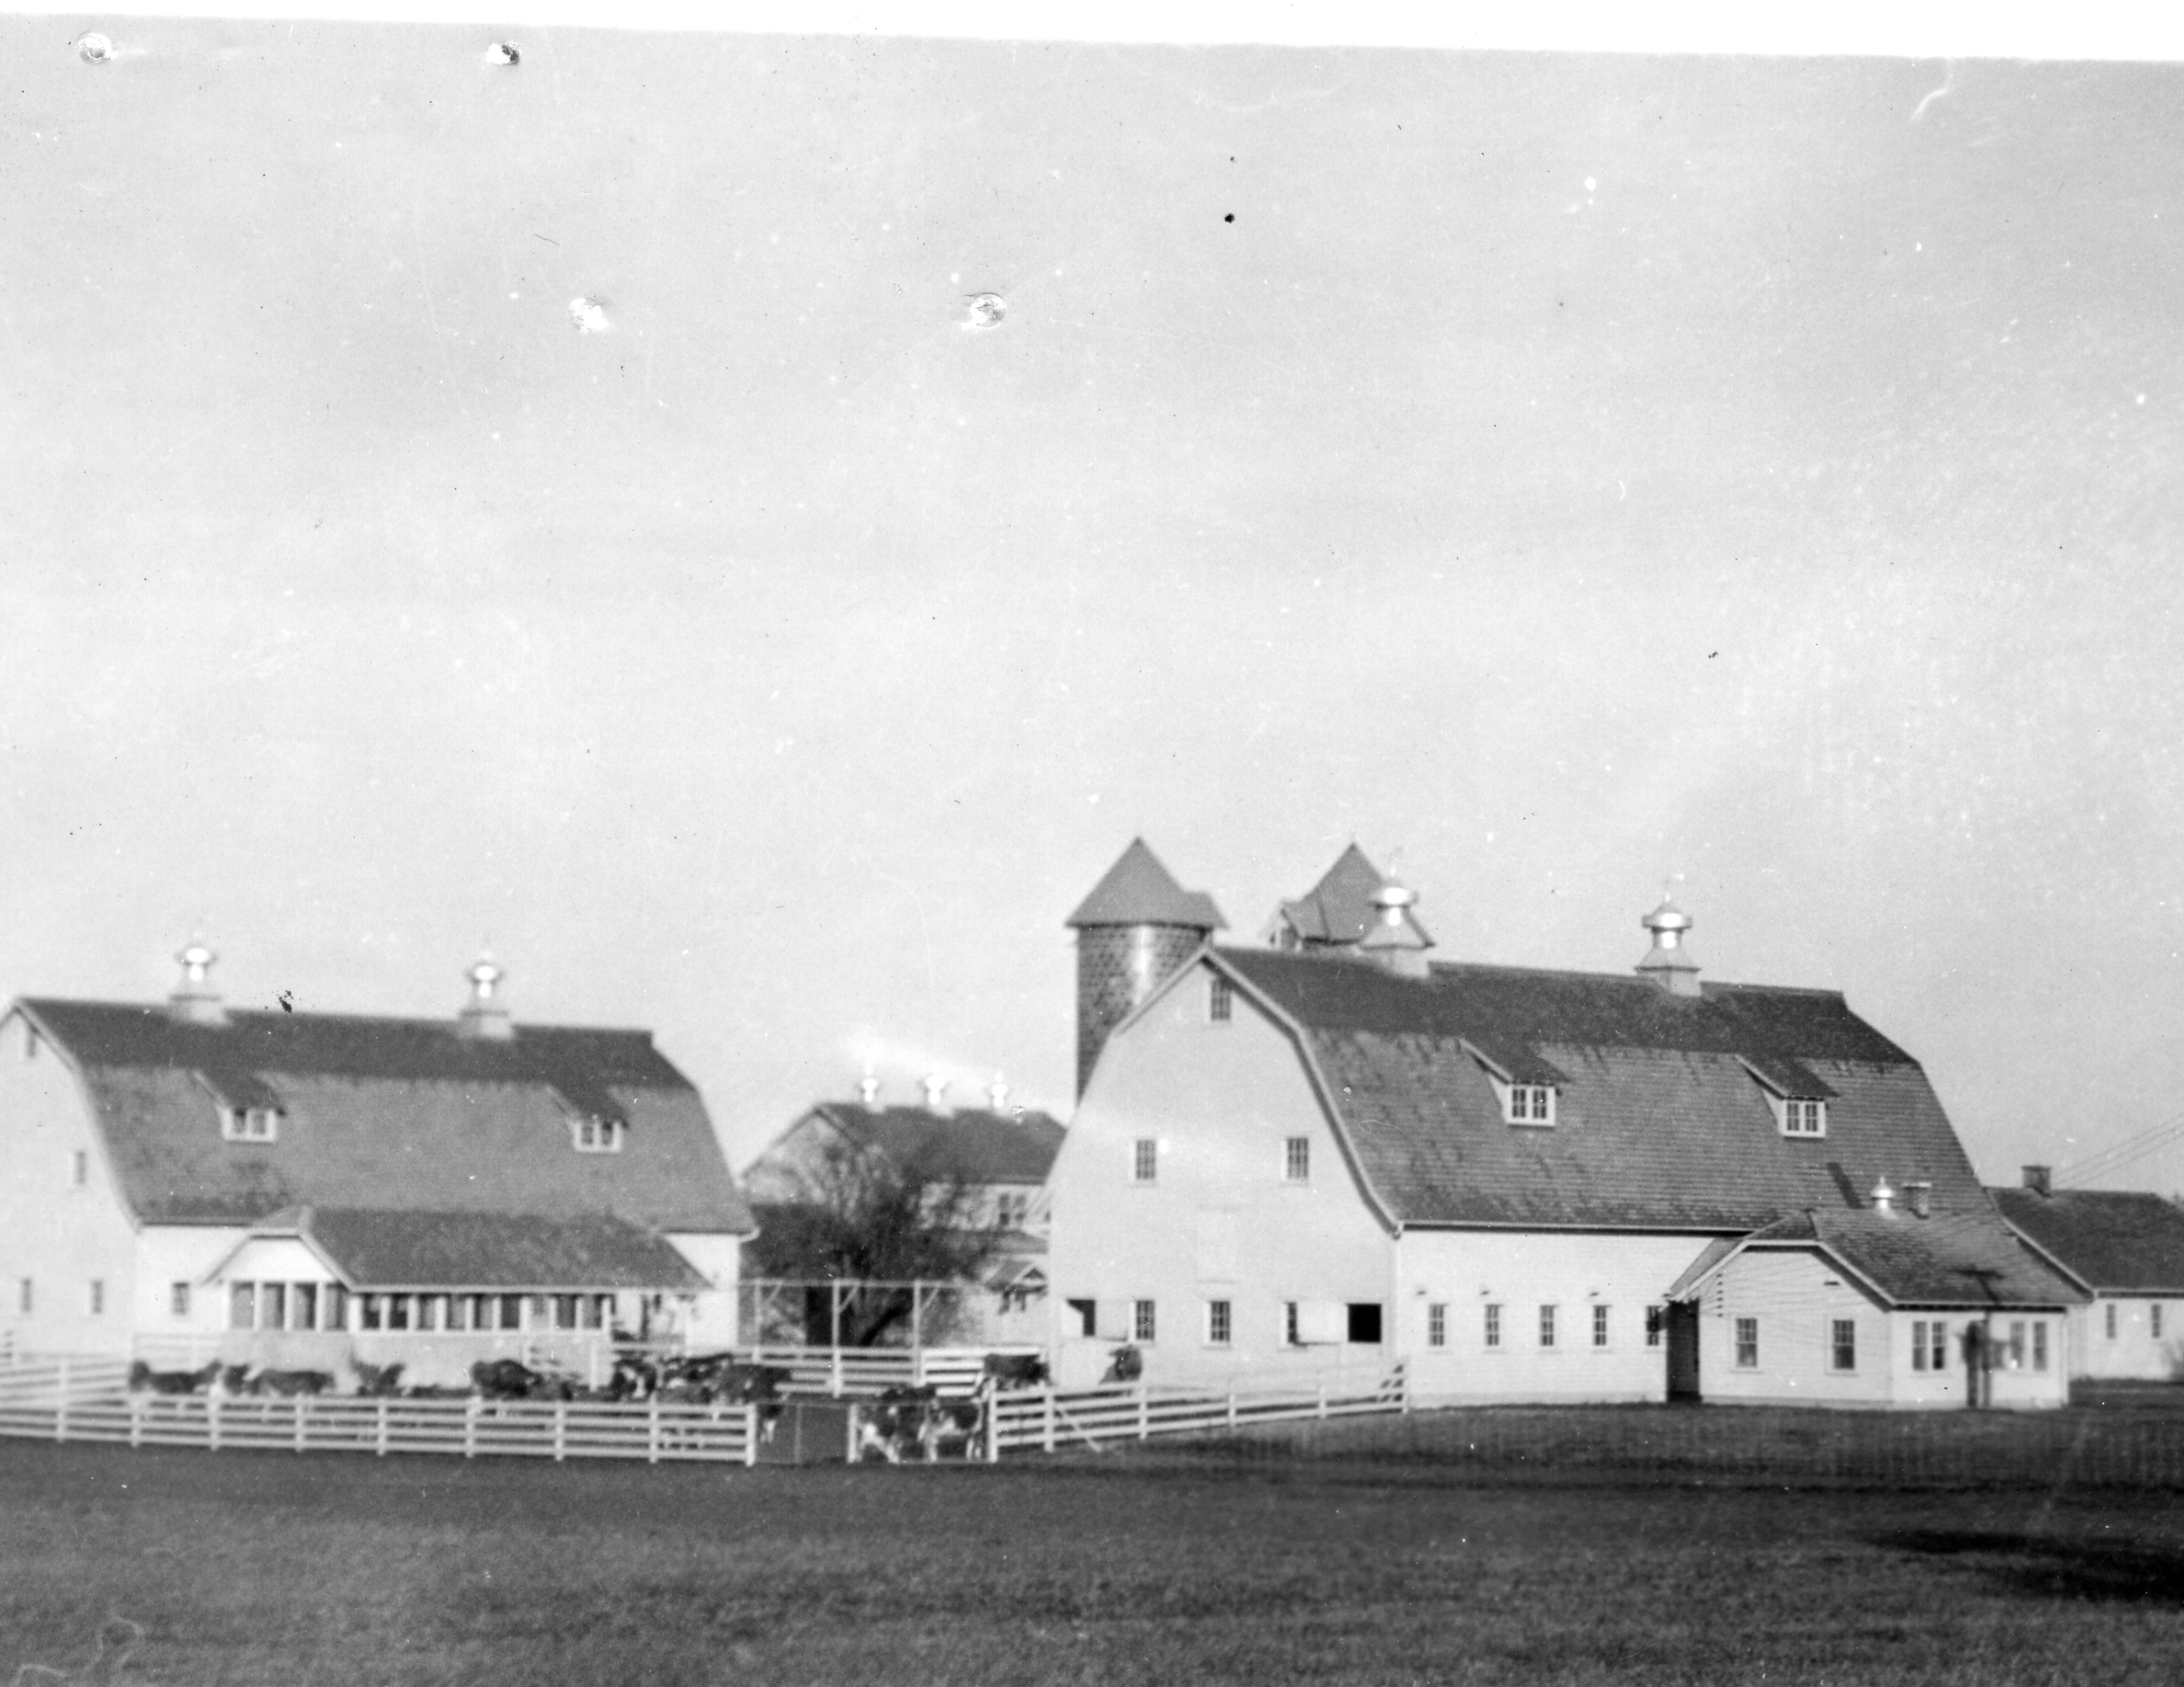 Photograph of the Dairy Farm and House Barn 